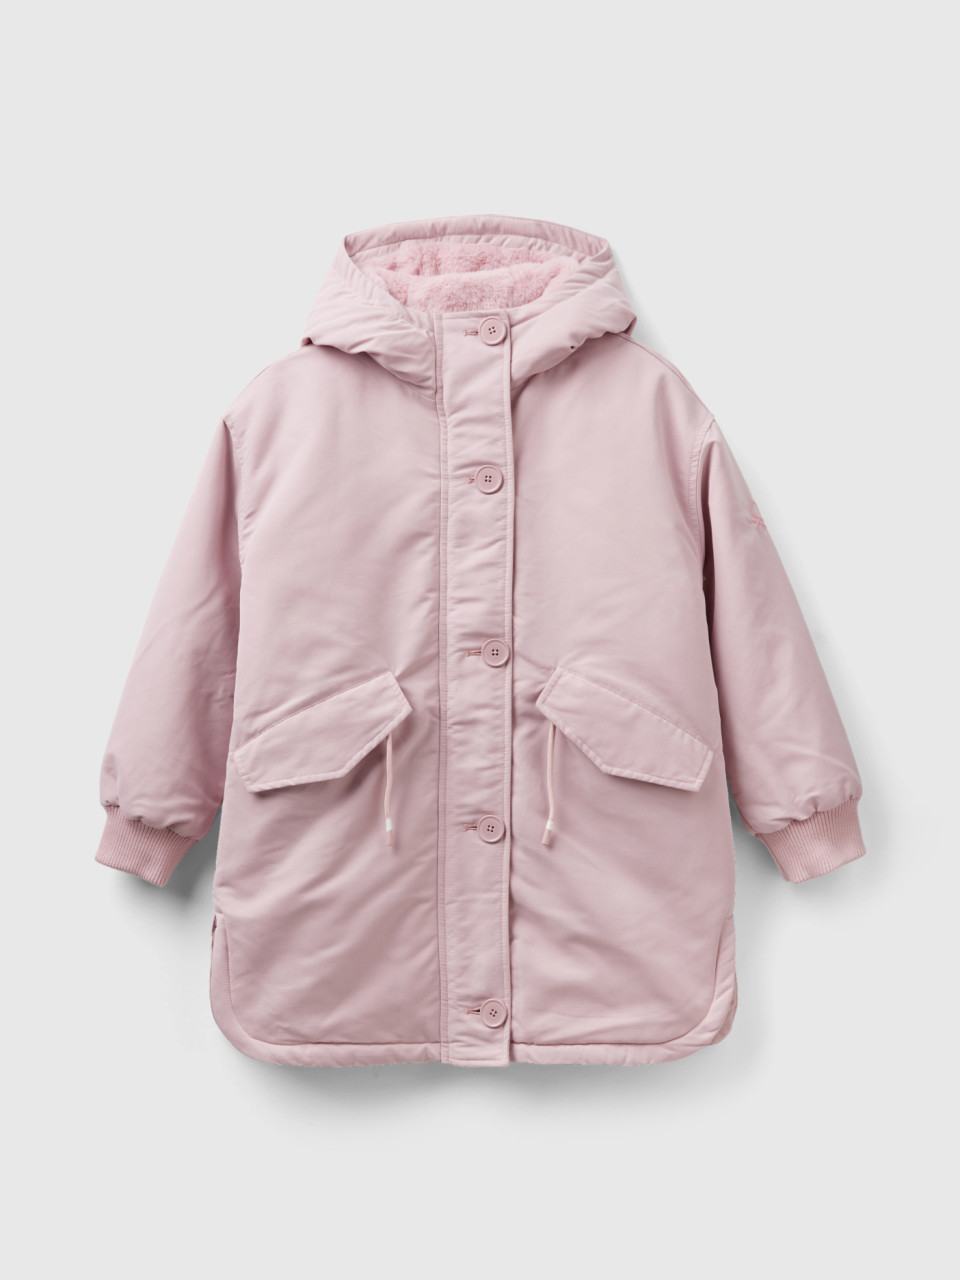 Benetton, Padded Parka With Drawstring, Pink, Kids